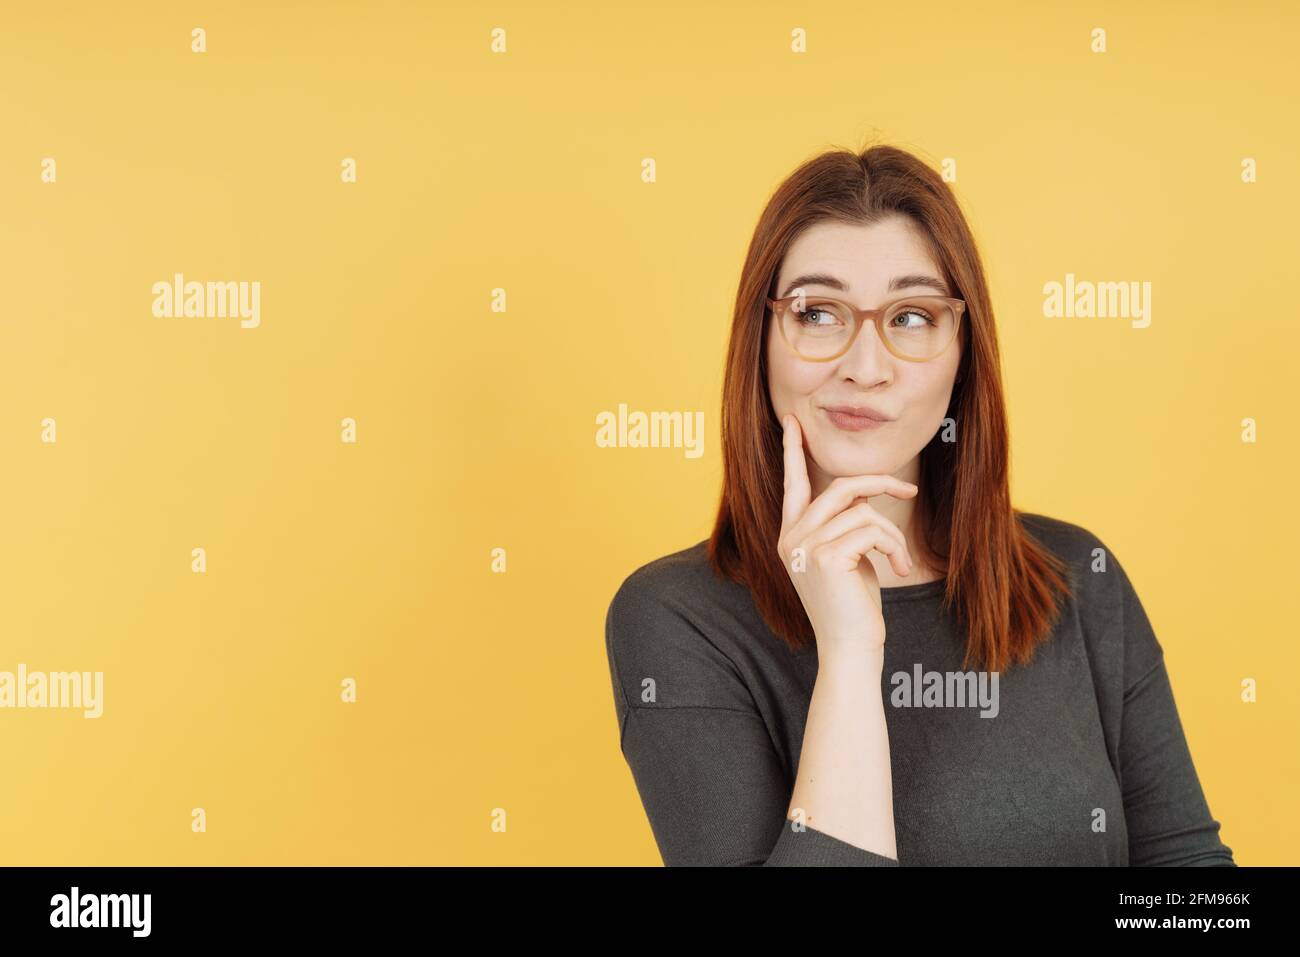 Pensive young woman mulling over a problem with a pensive smile and her hand to her chinas she looks aside with a wry expression over a yellow studio Stock Photo